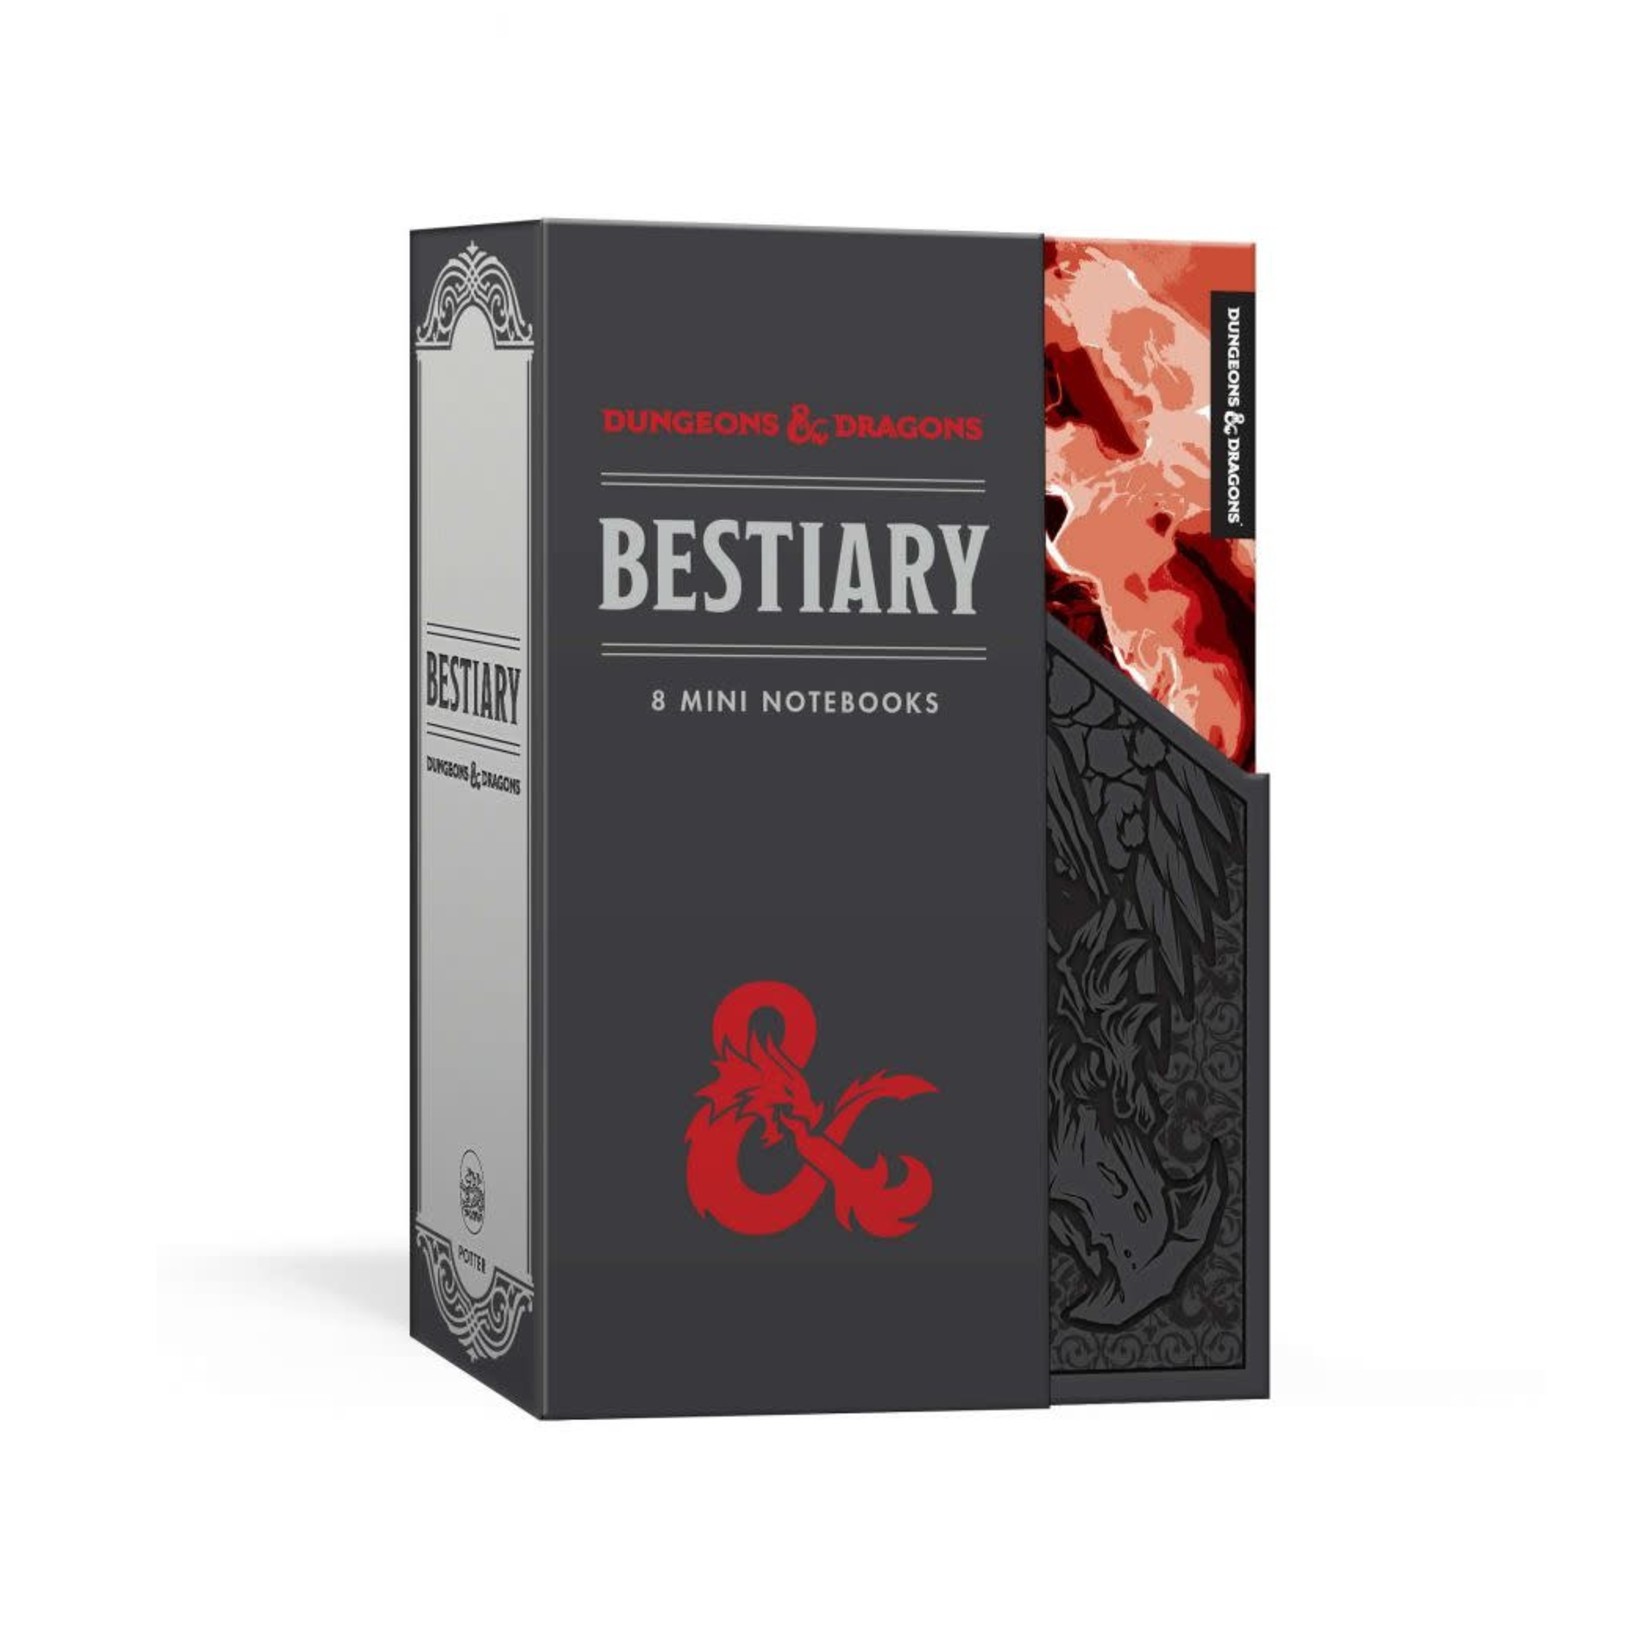 The Bestiary Notebook Set